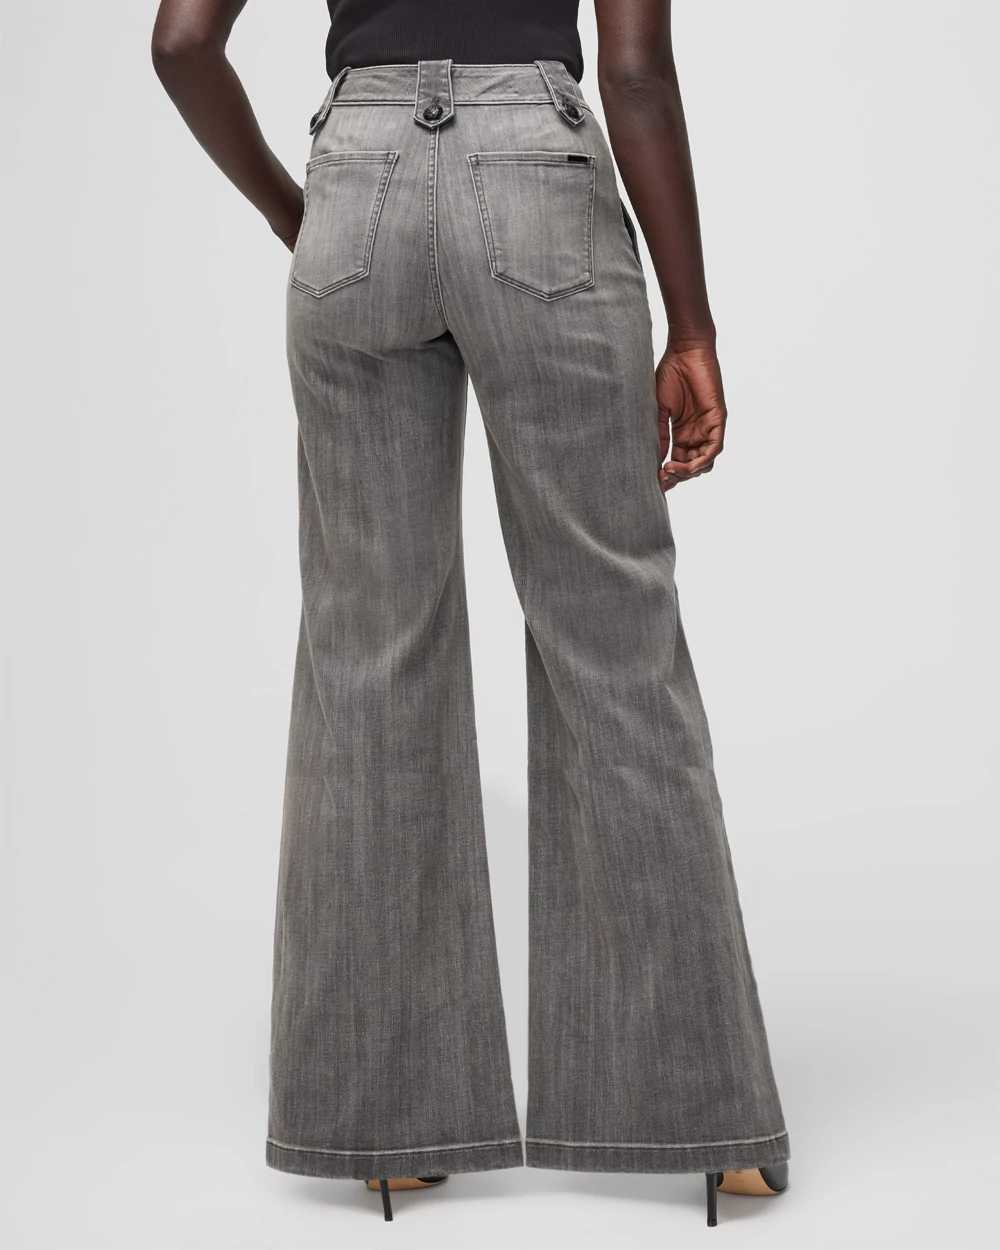 Curvy High-Rise Mariner Wide Leg Jeans click to view larger image.